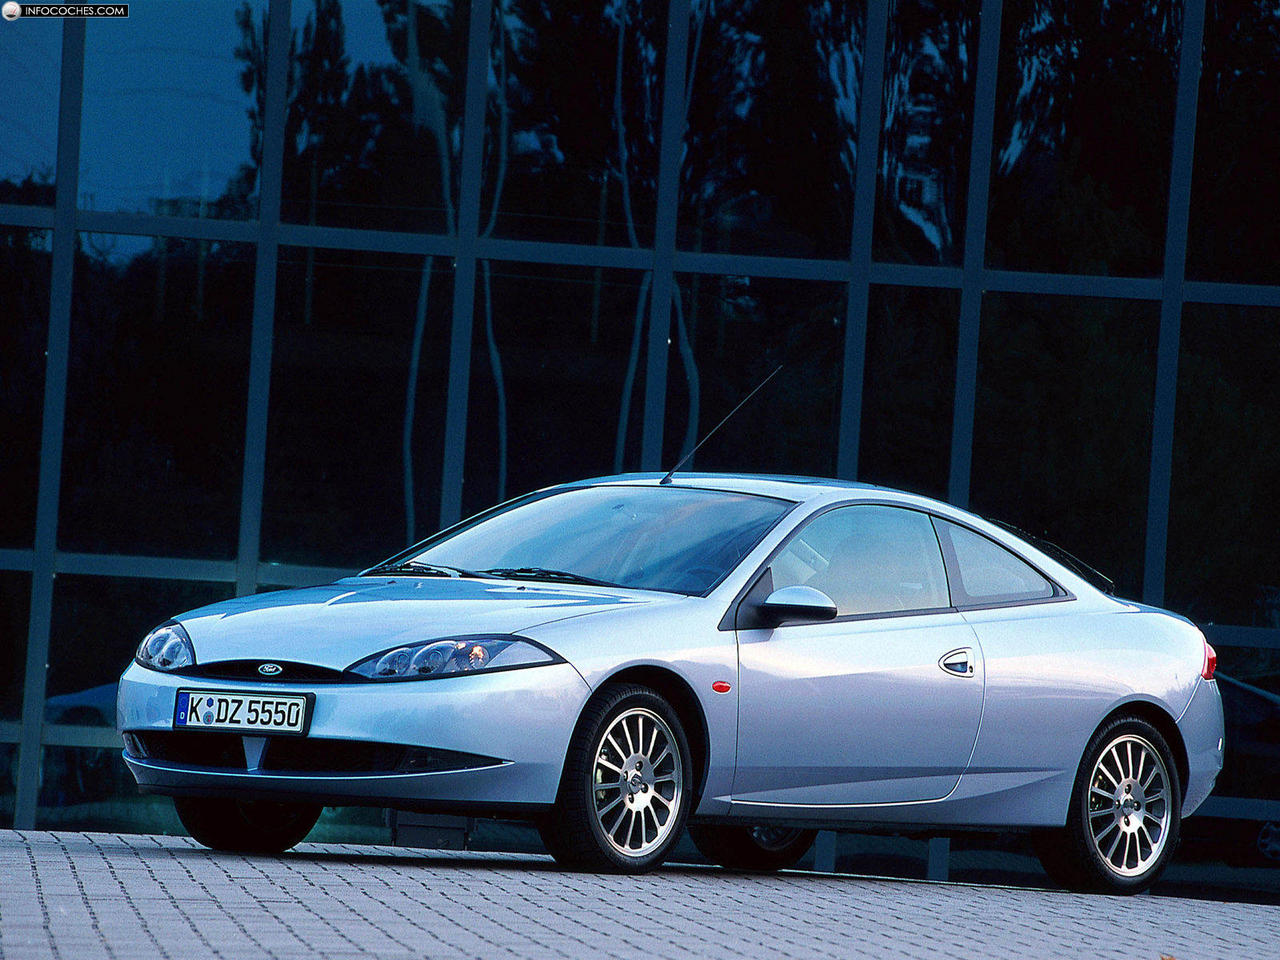 Ford cougar 2000 photo - 10